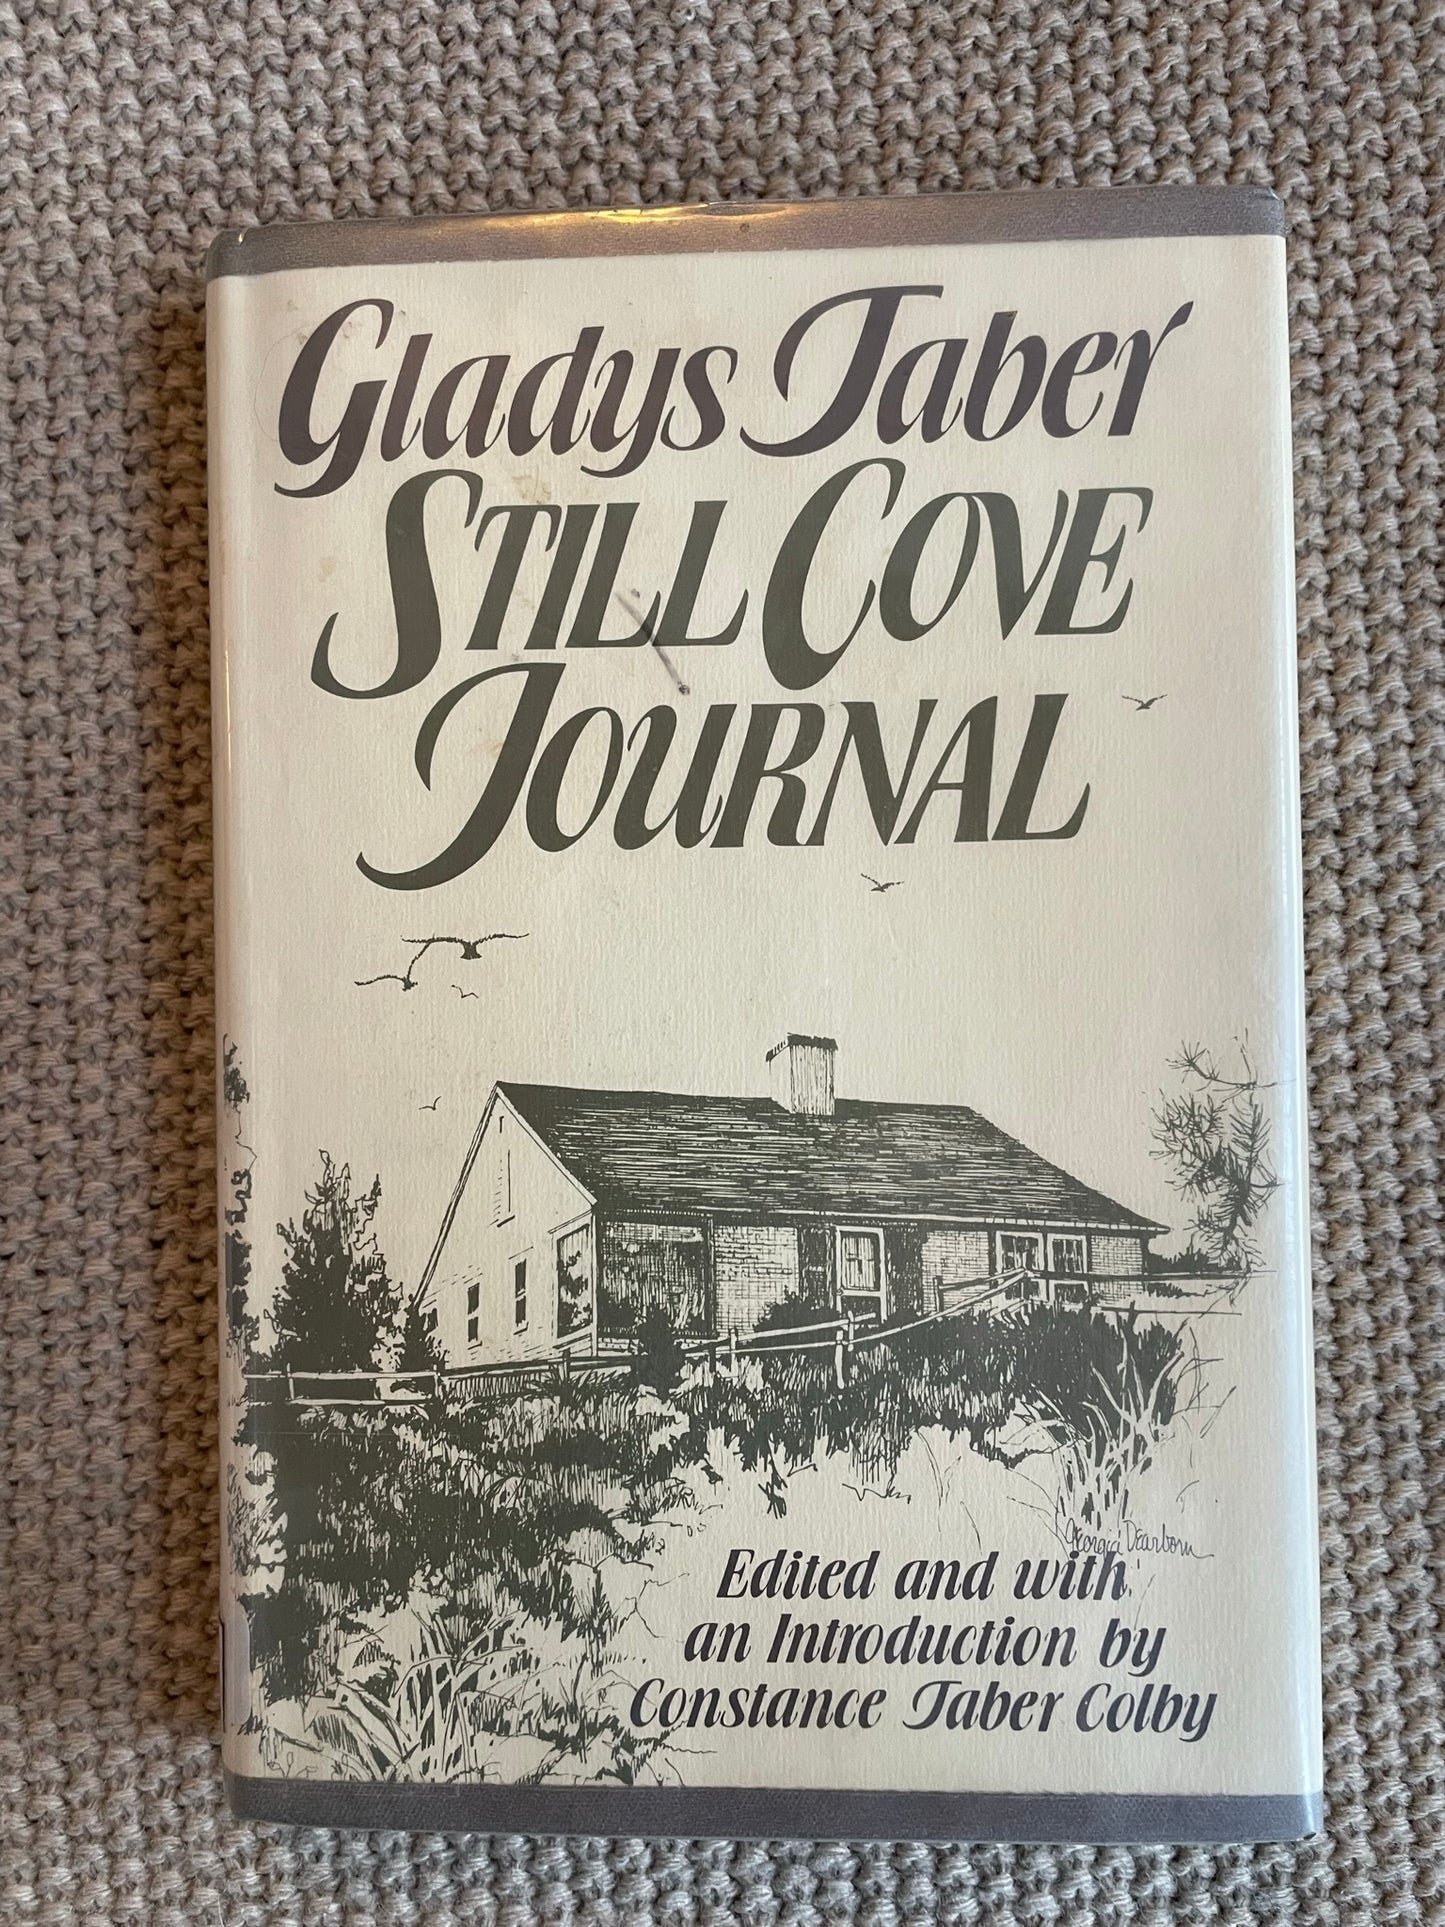 Taber, Gladys: Still Cove Journal (First Edition, 1981)